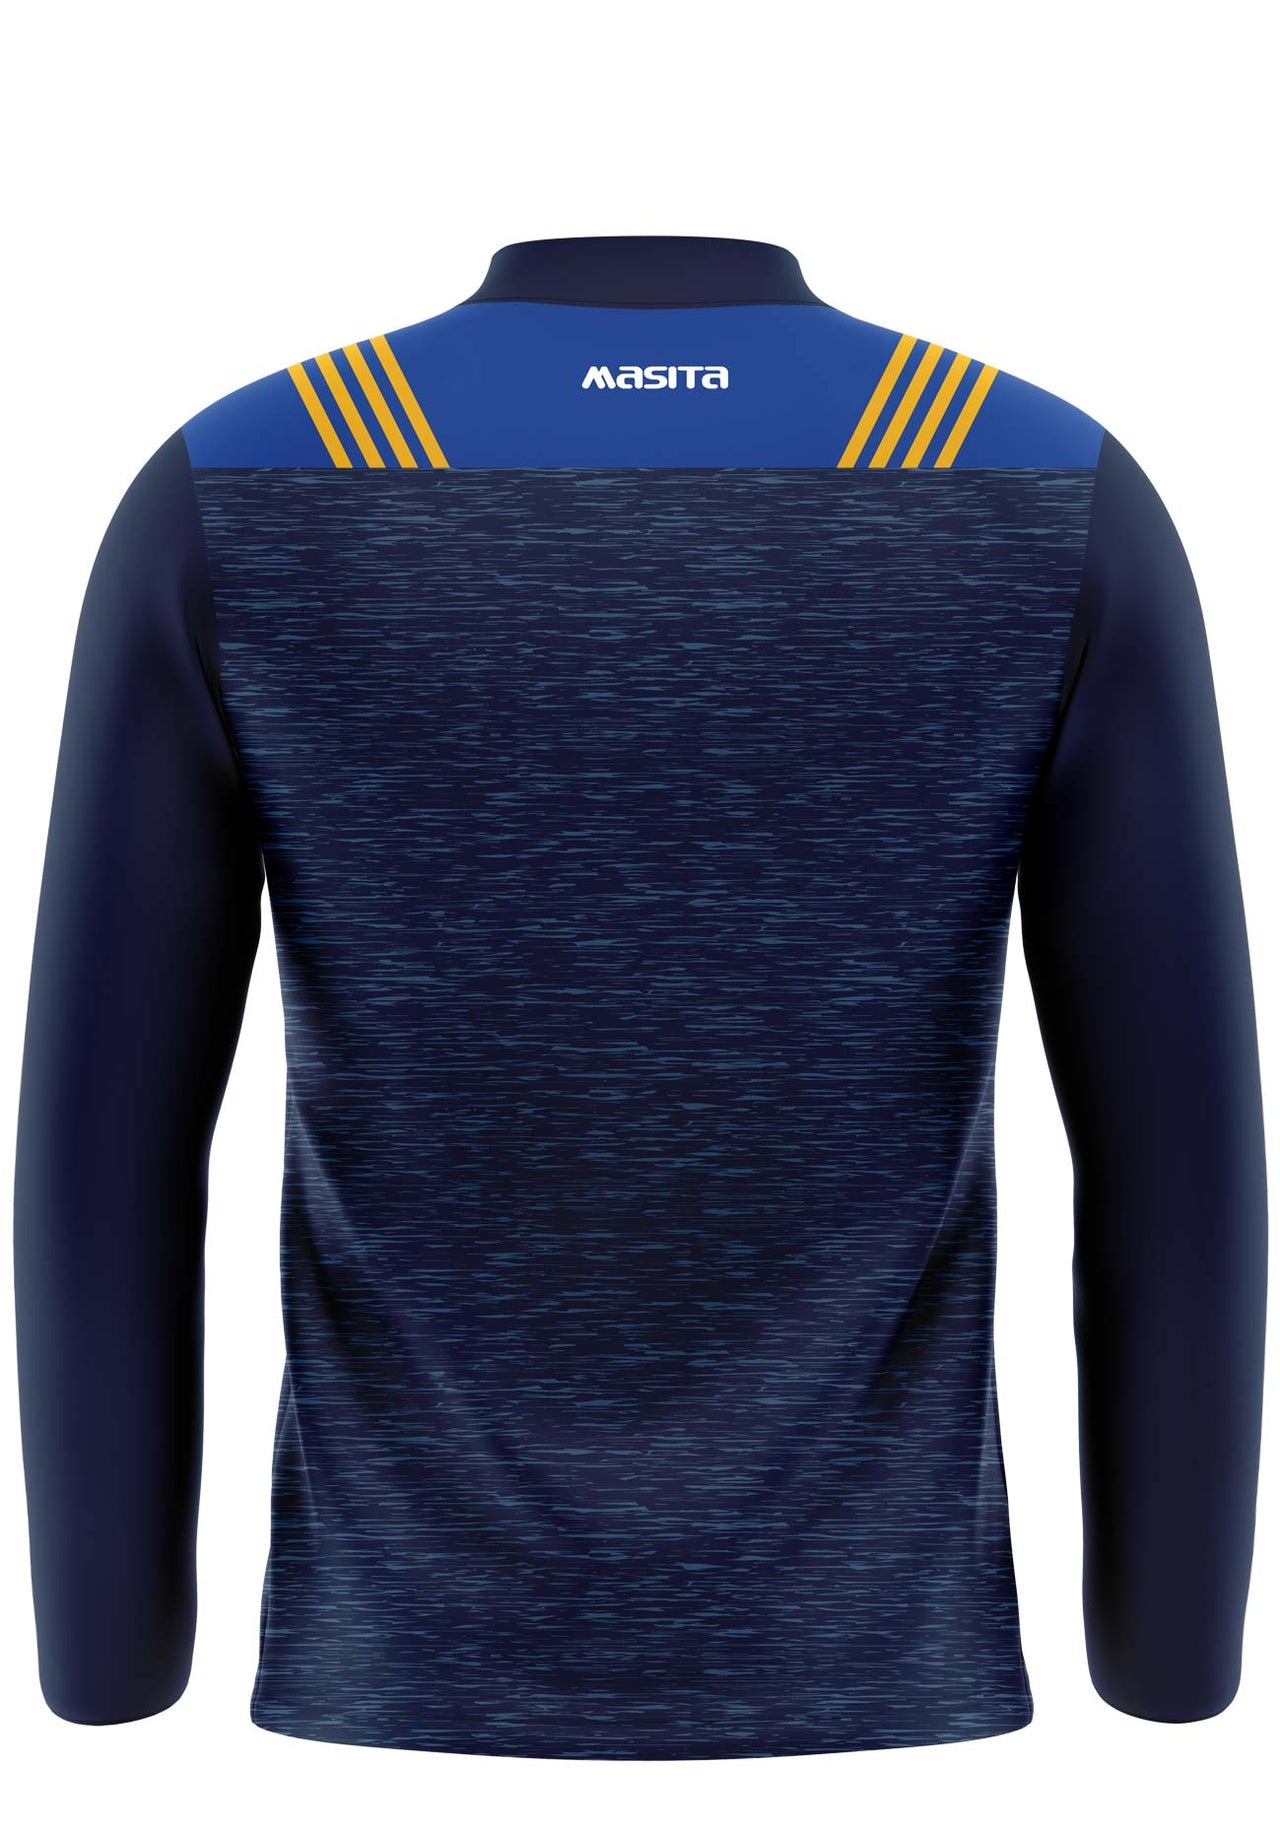 Carrigtwohill Camogie Sweater Kids